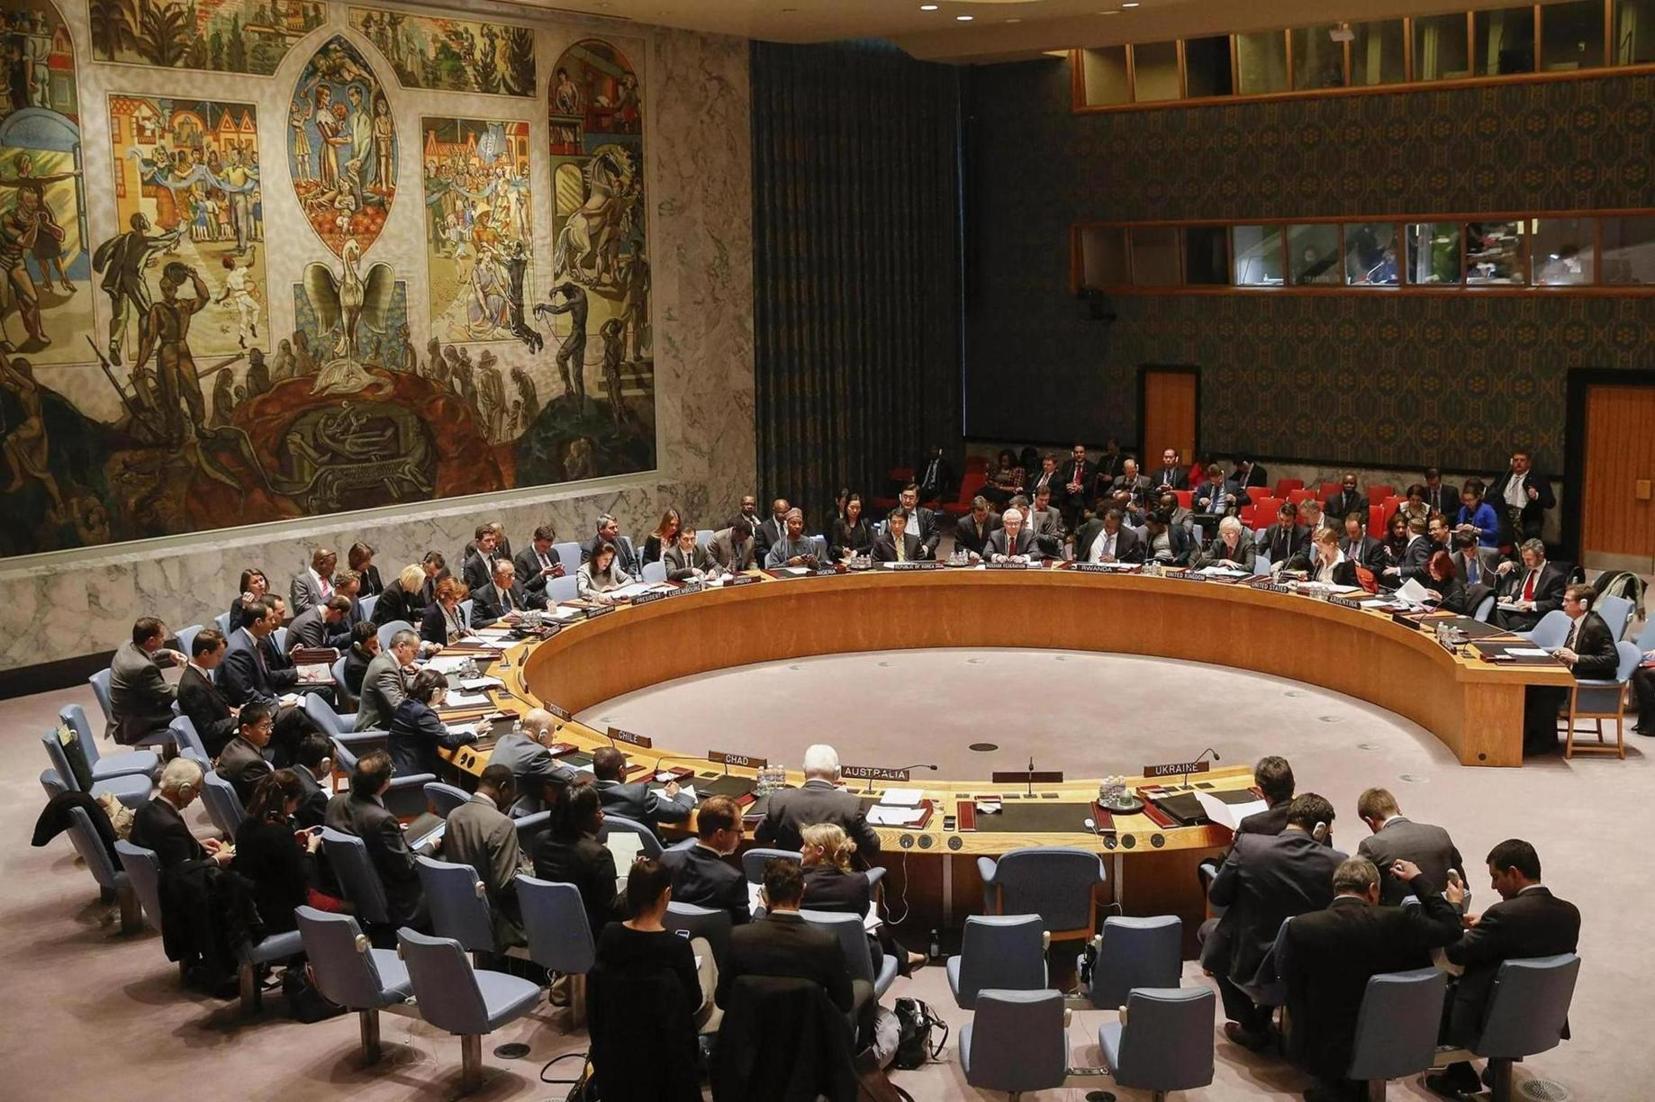 Angola wants African countries in the UN Security Council